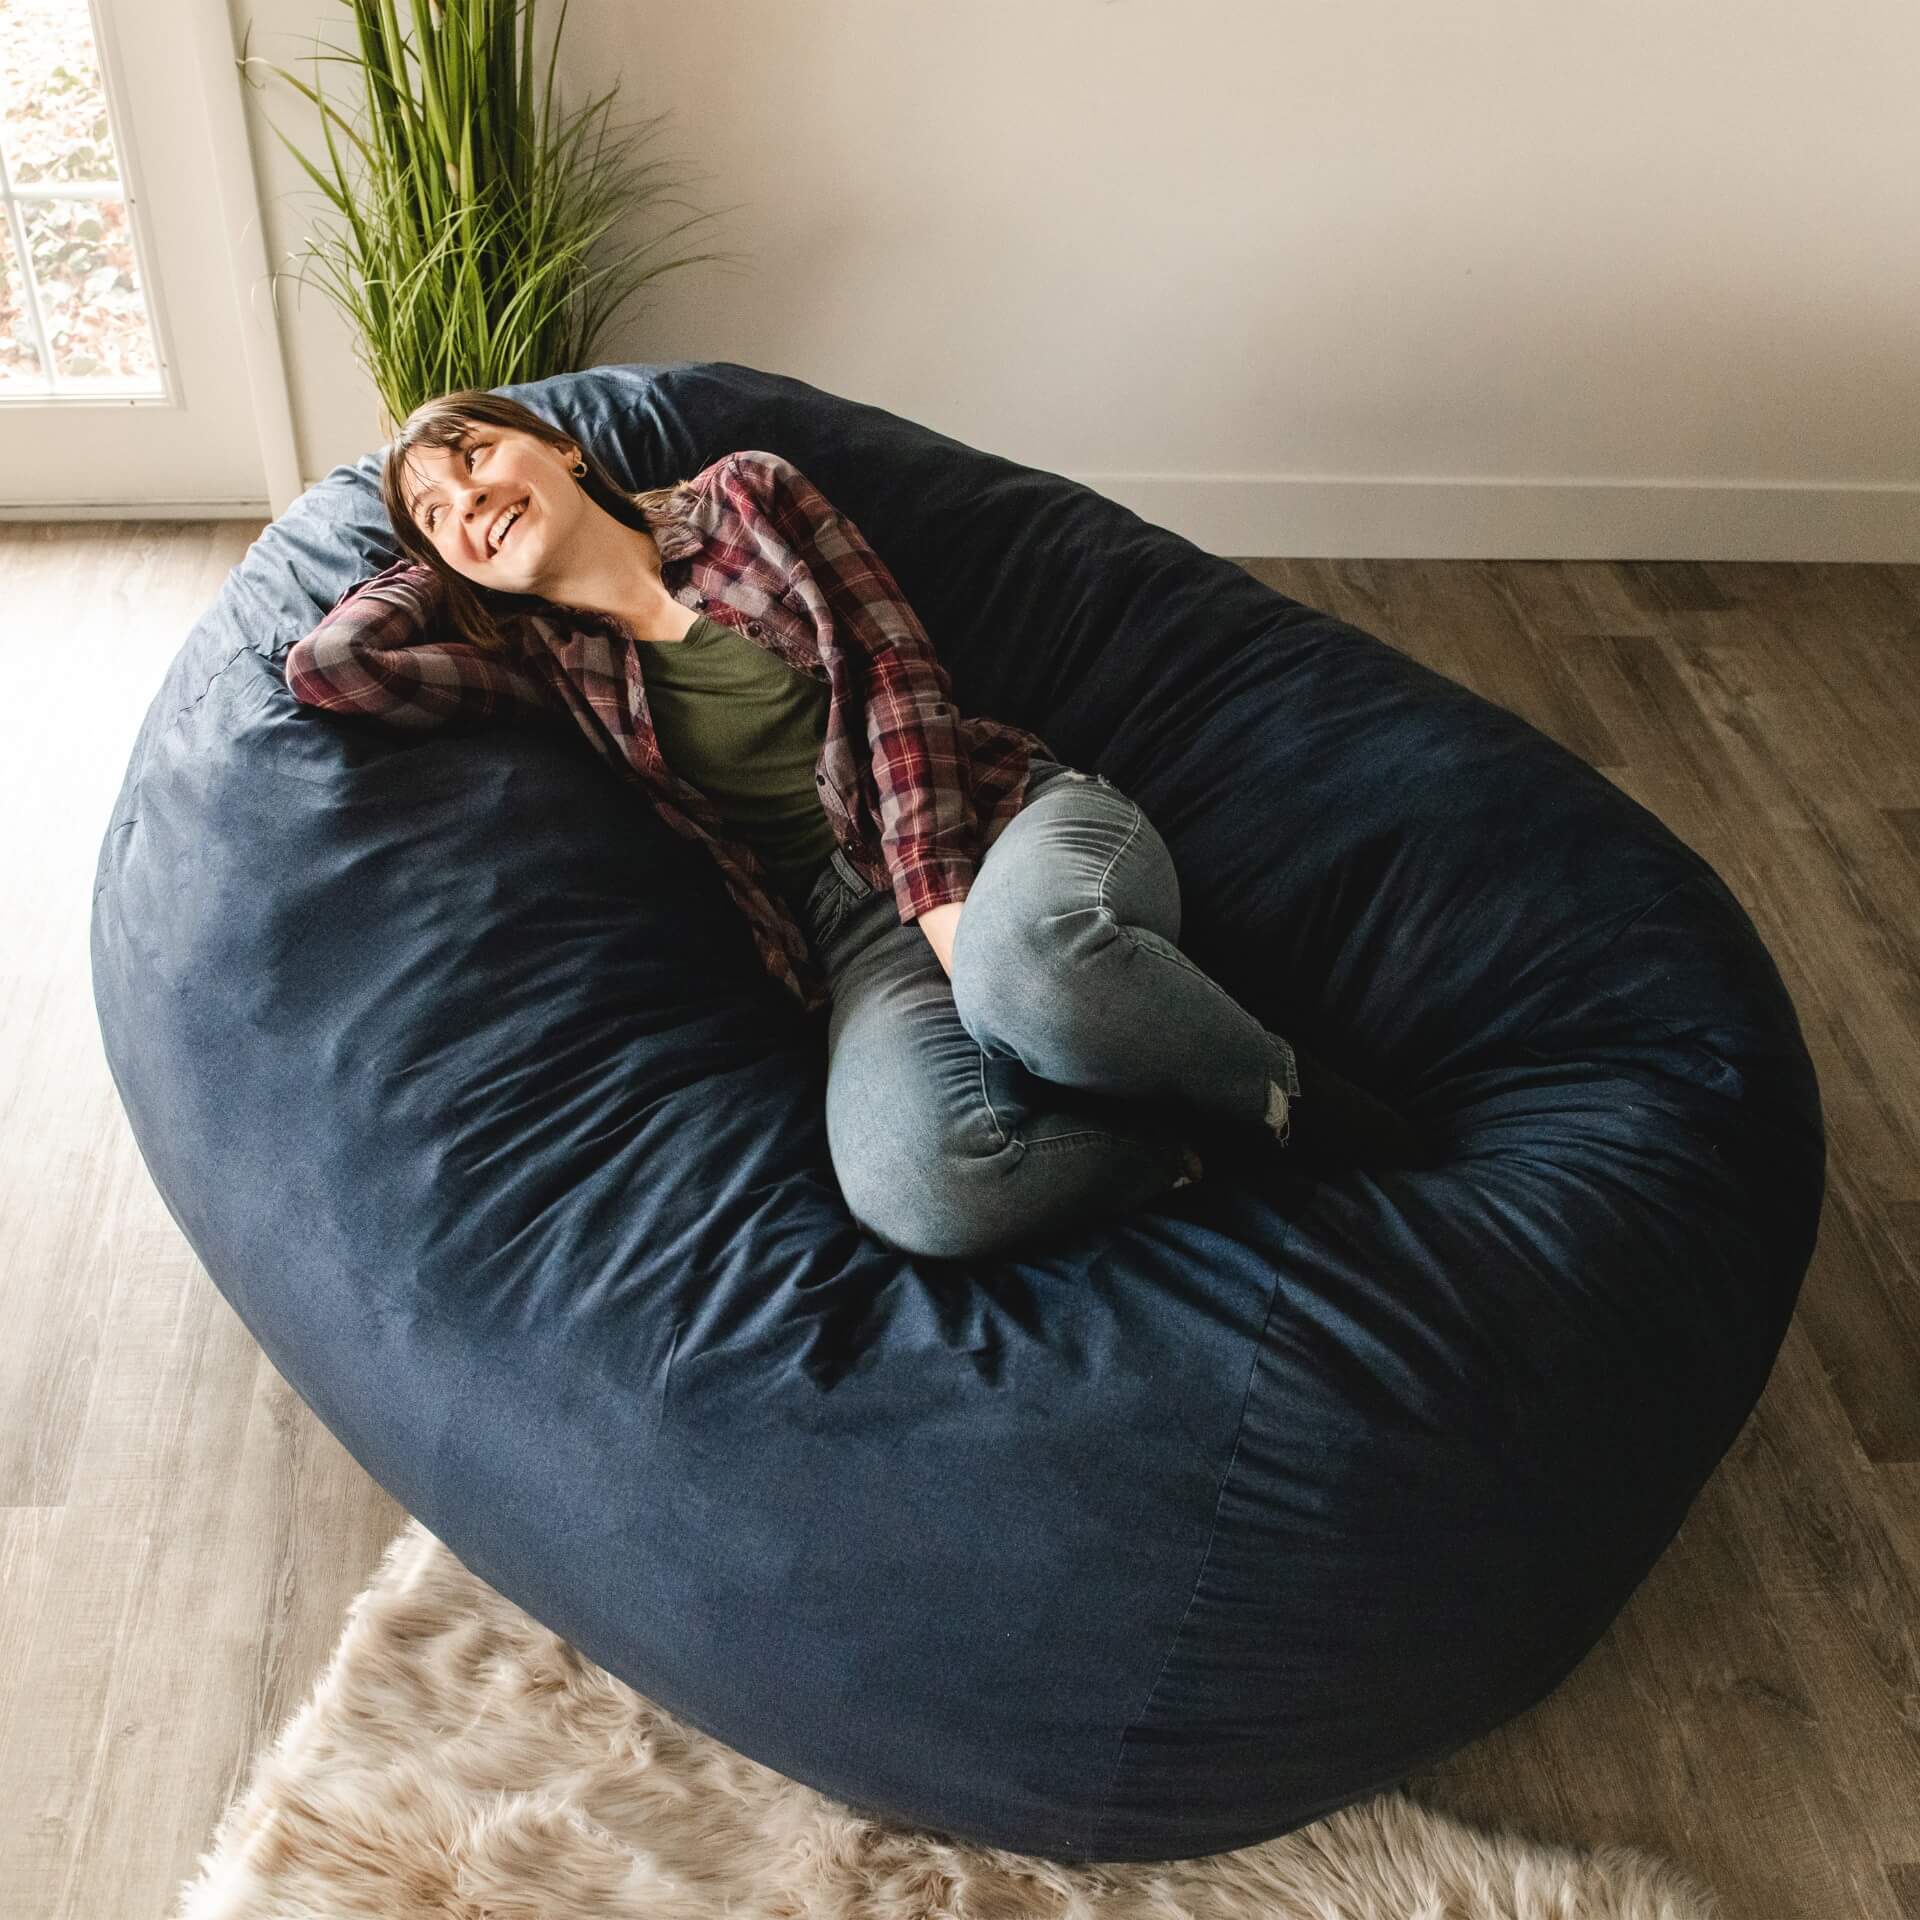 Amazon.com: Big Joe Fuf XXL Foam Filled Bean Bag Chair with Removable  Cover, Fog Lenox, Durable Woven Polyester, 6 feet Giant : Home & Kitchen